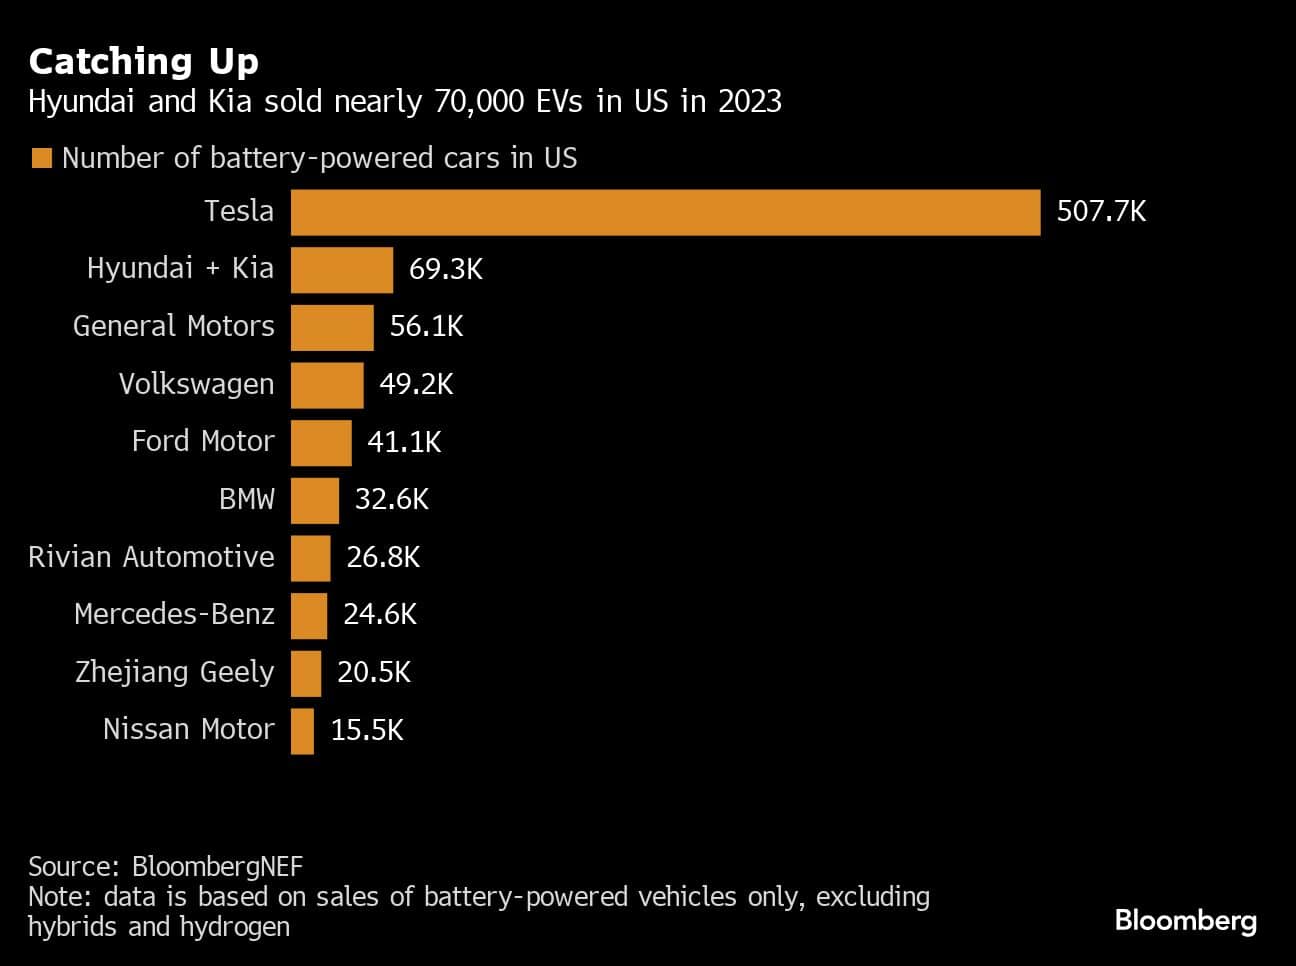 Catching Up | Hyundai and Kia sold nearly 70,000 EVs in US in 2023